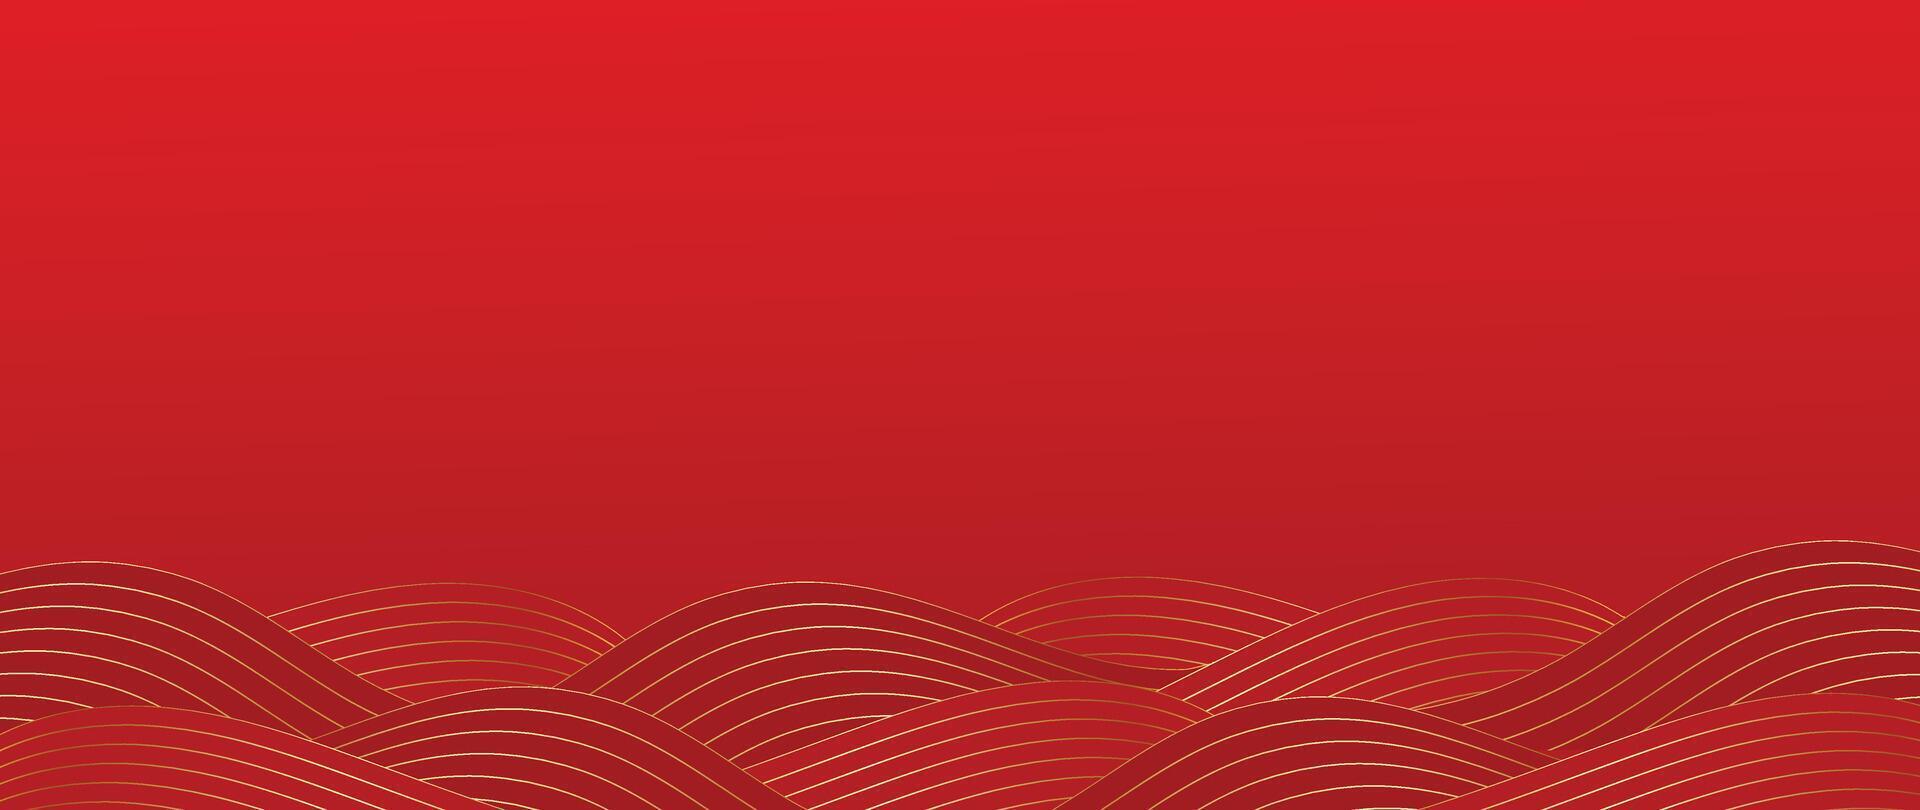 Happy Chinese new year background . Luxury wallpaper design with chinese sea wave on red background. Modern luxury oriental illustration for cover, banner, website, decor. vector